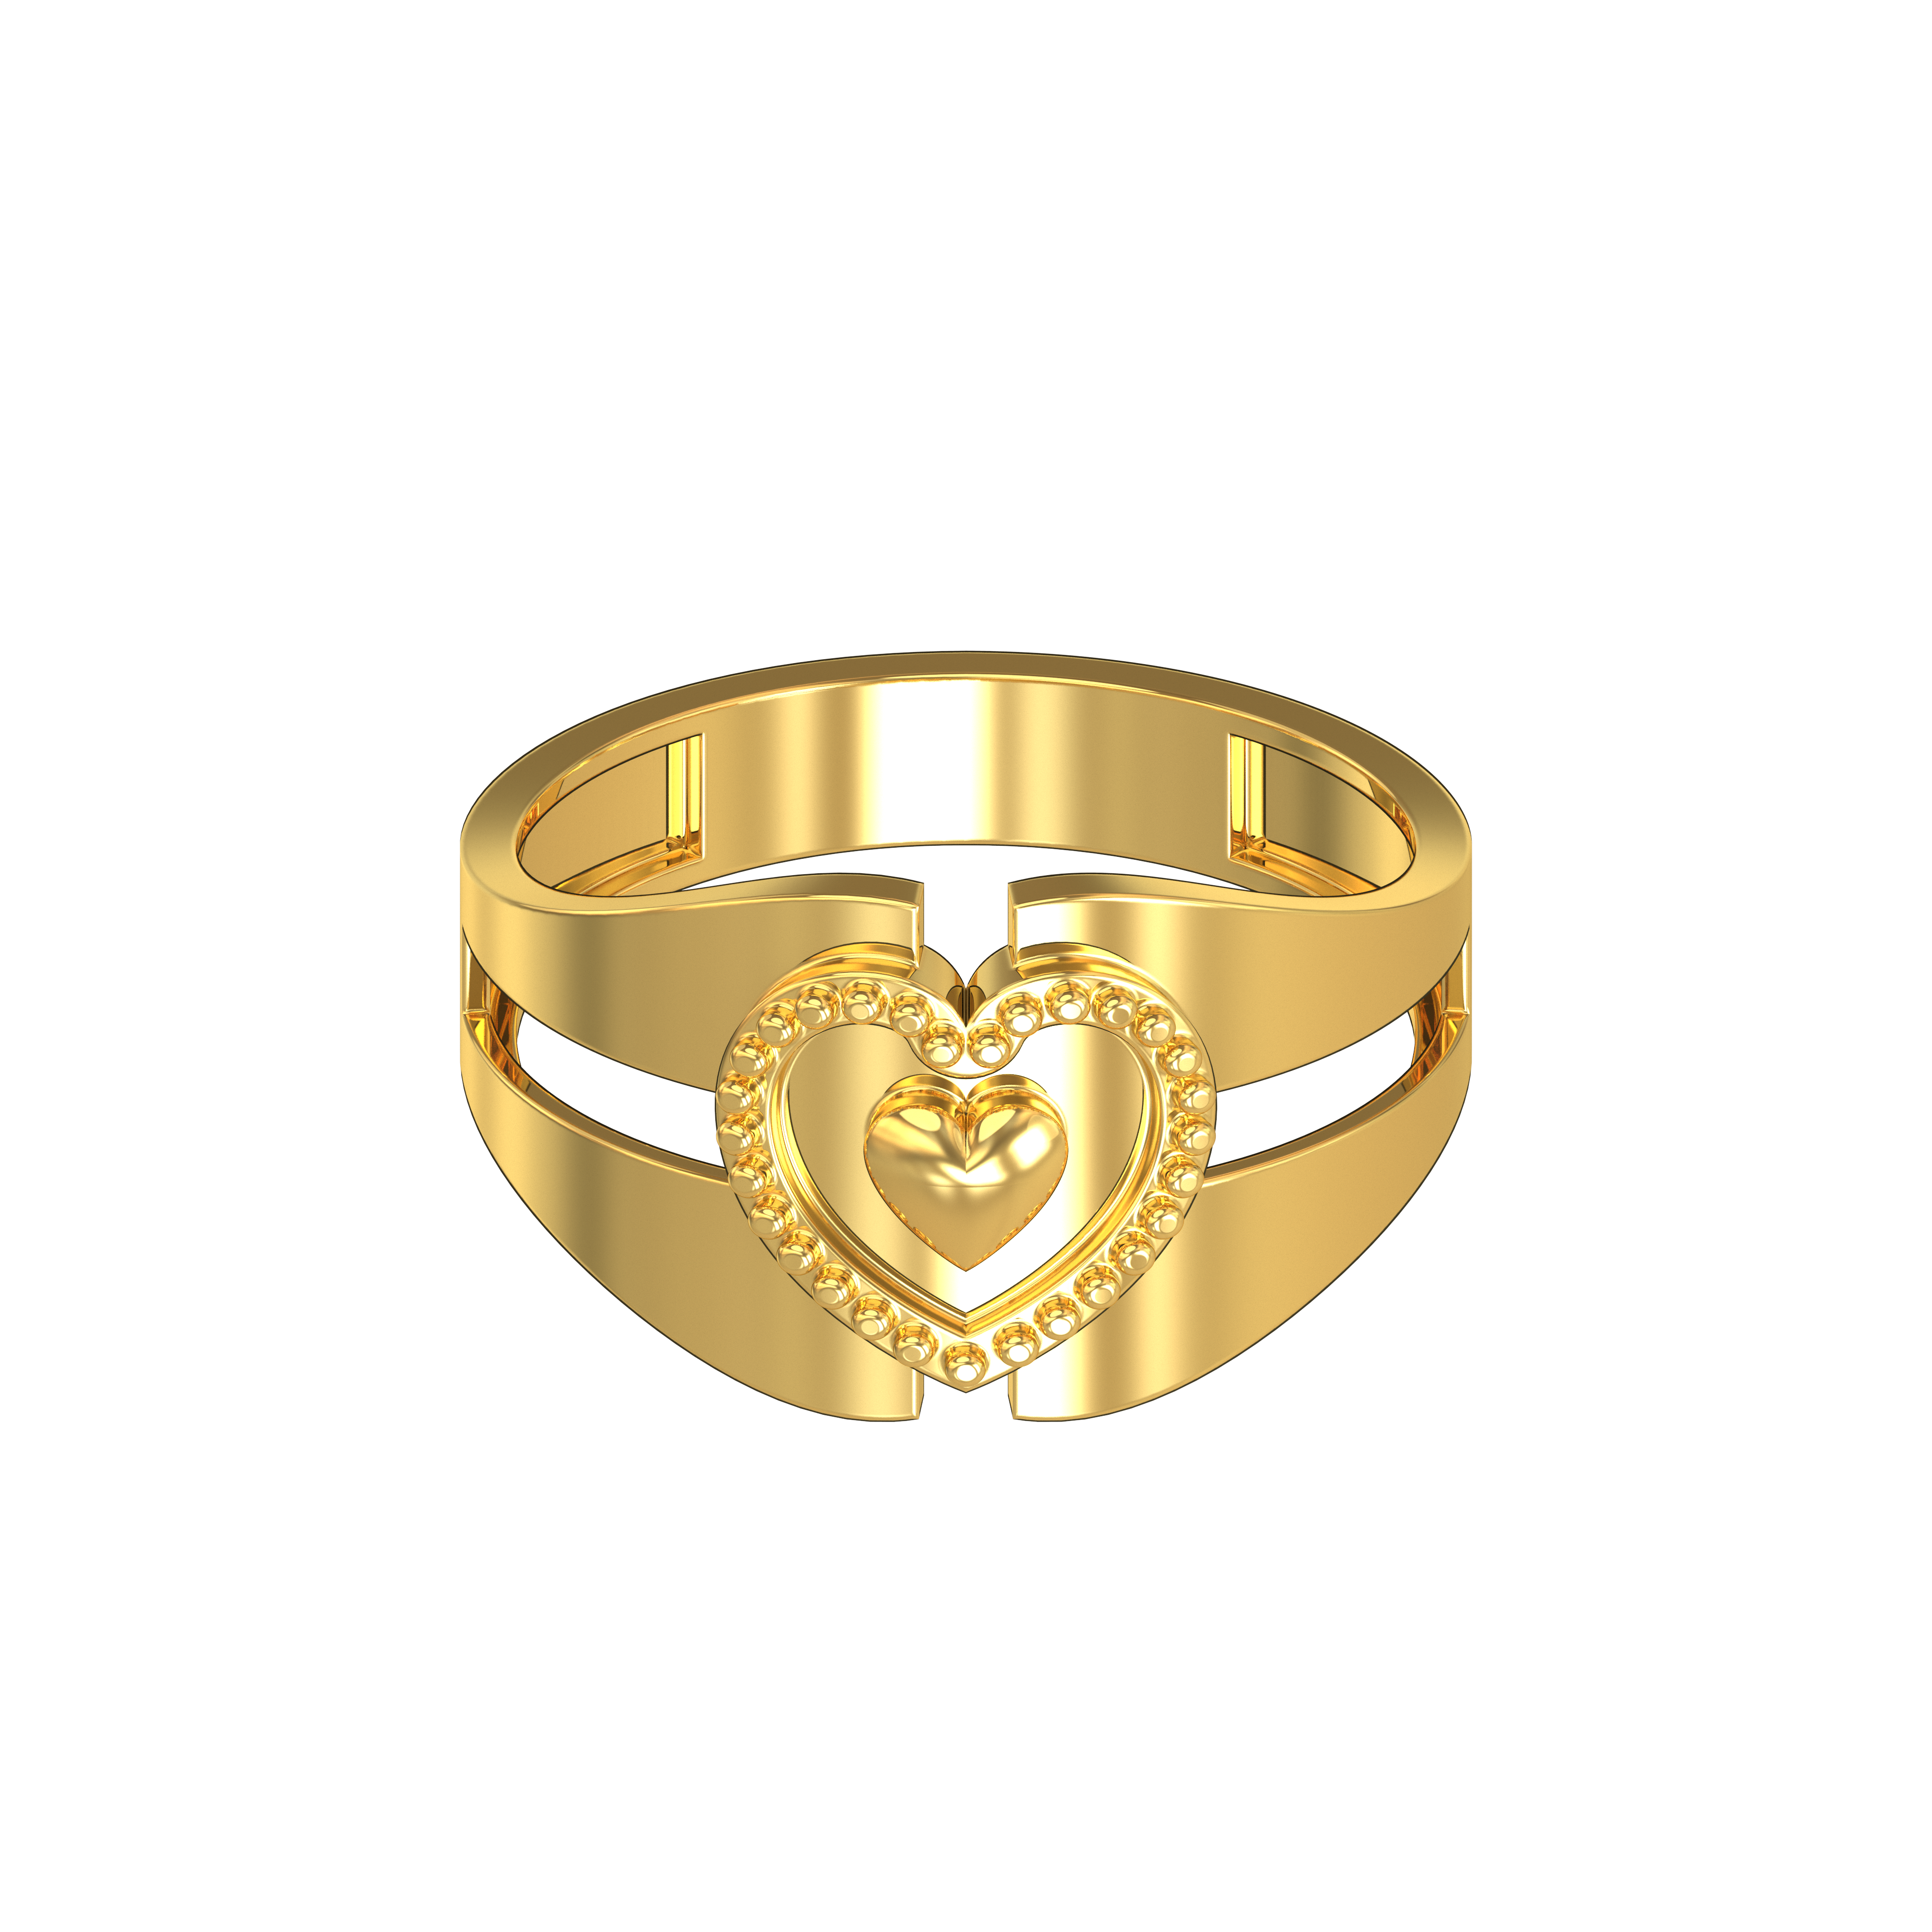 Buy Gold Rings for Men Online | Latest Gold Rings Designs with Best Price